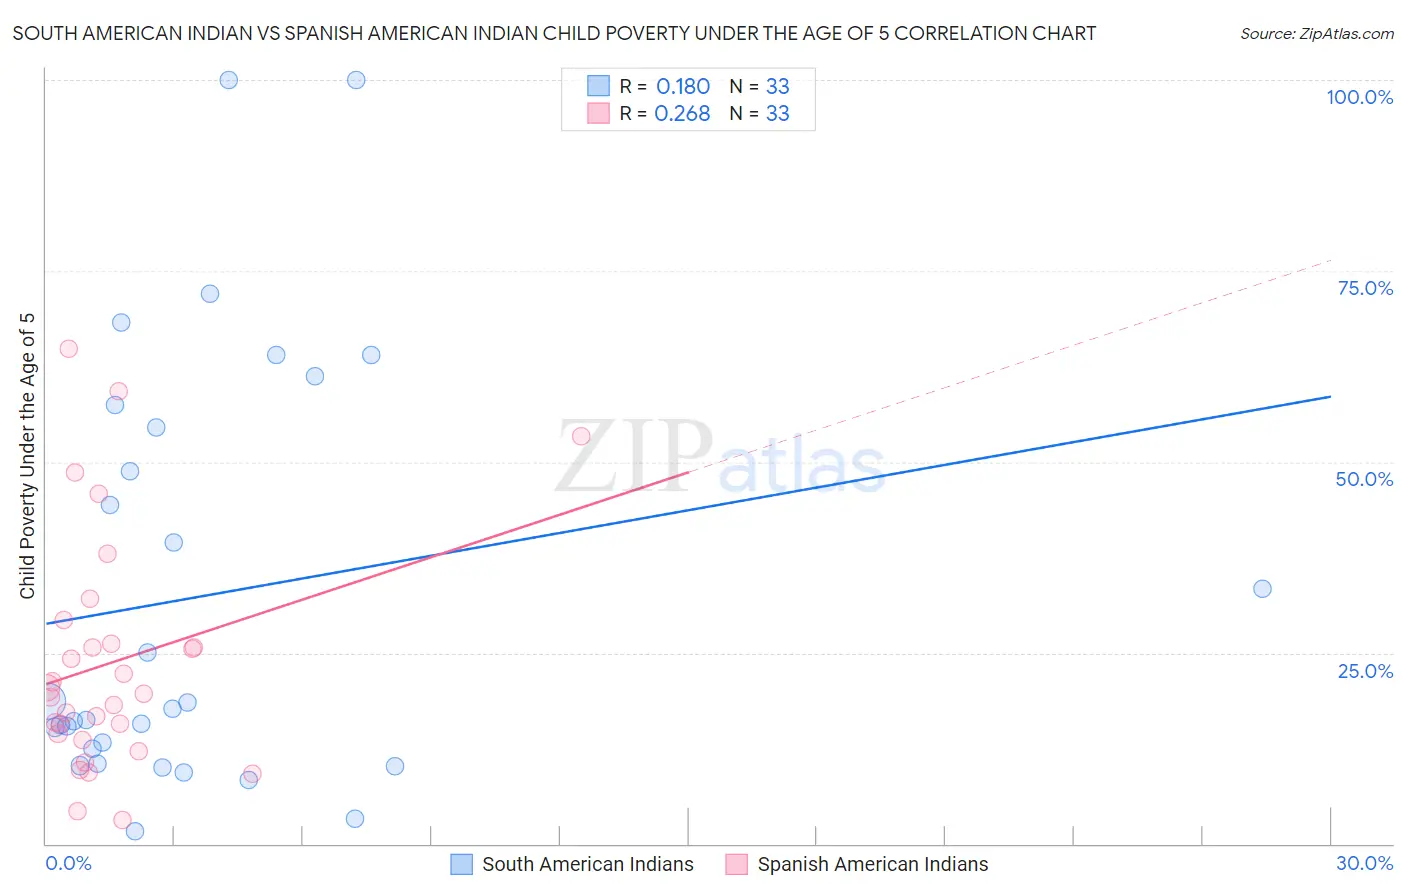 South American Indian vs Spanish American Indian Child Poverty Under the Age of 5